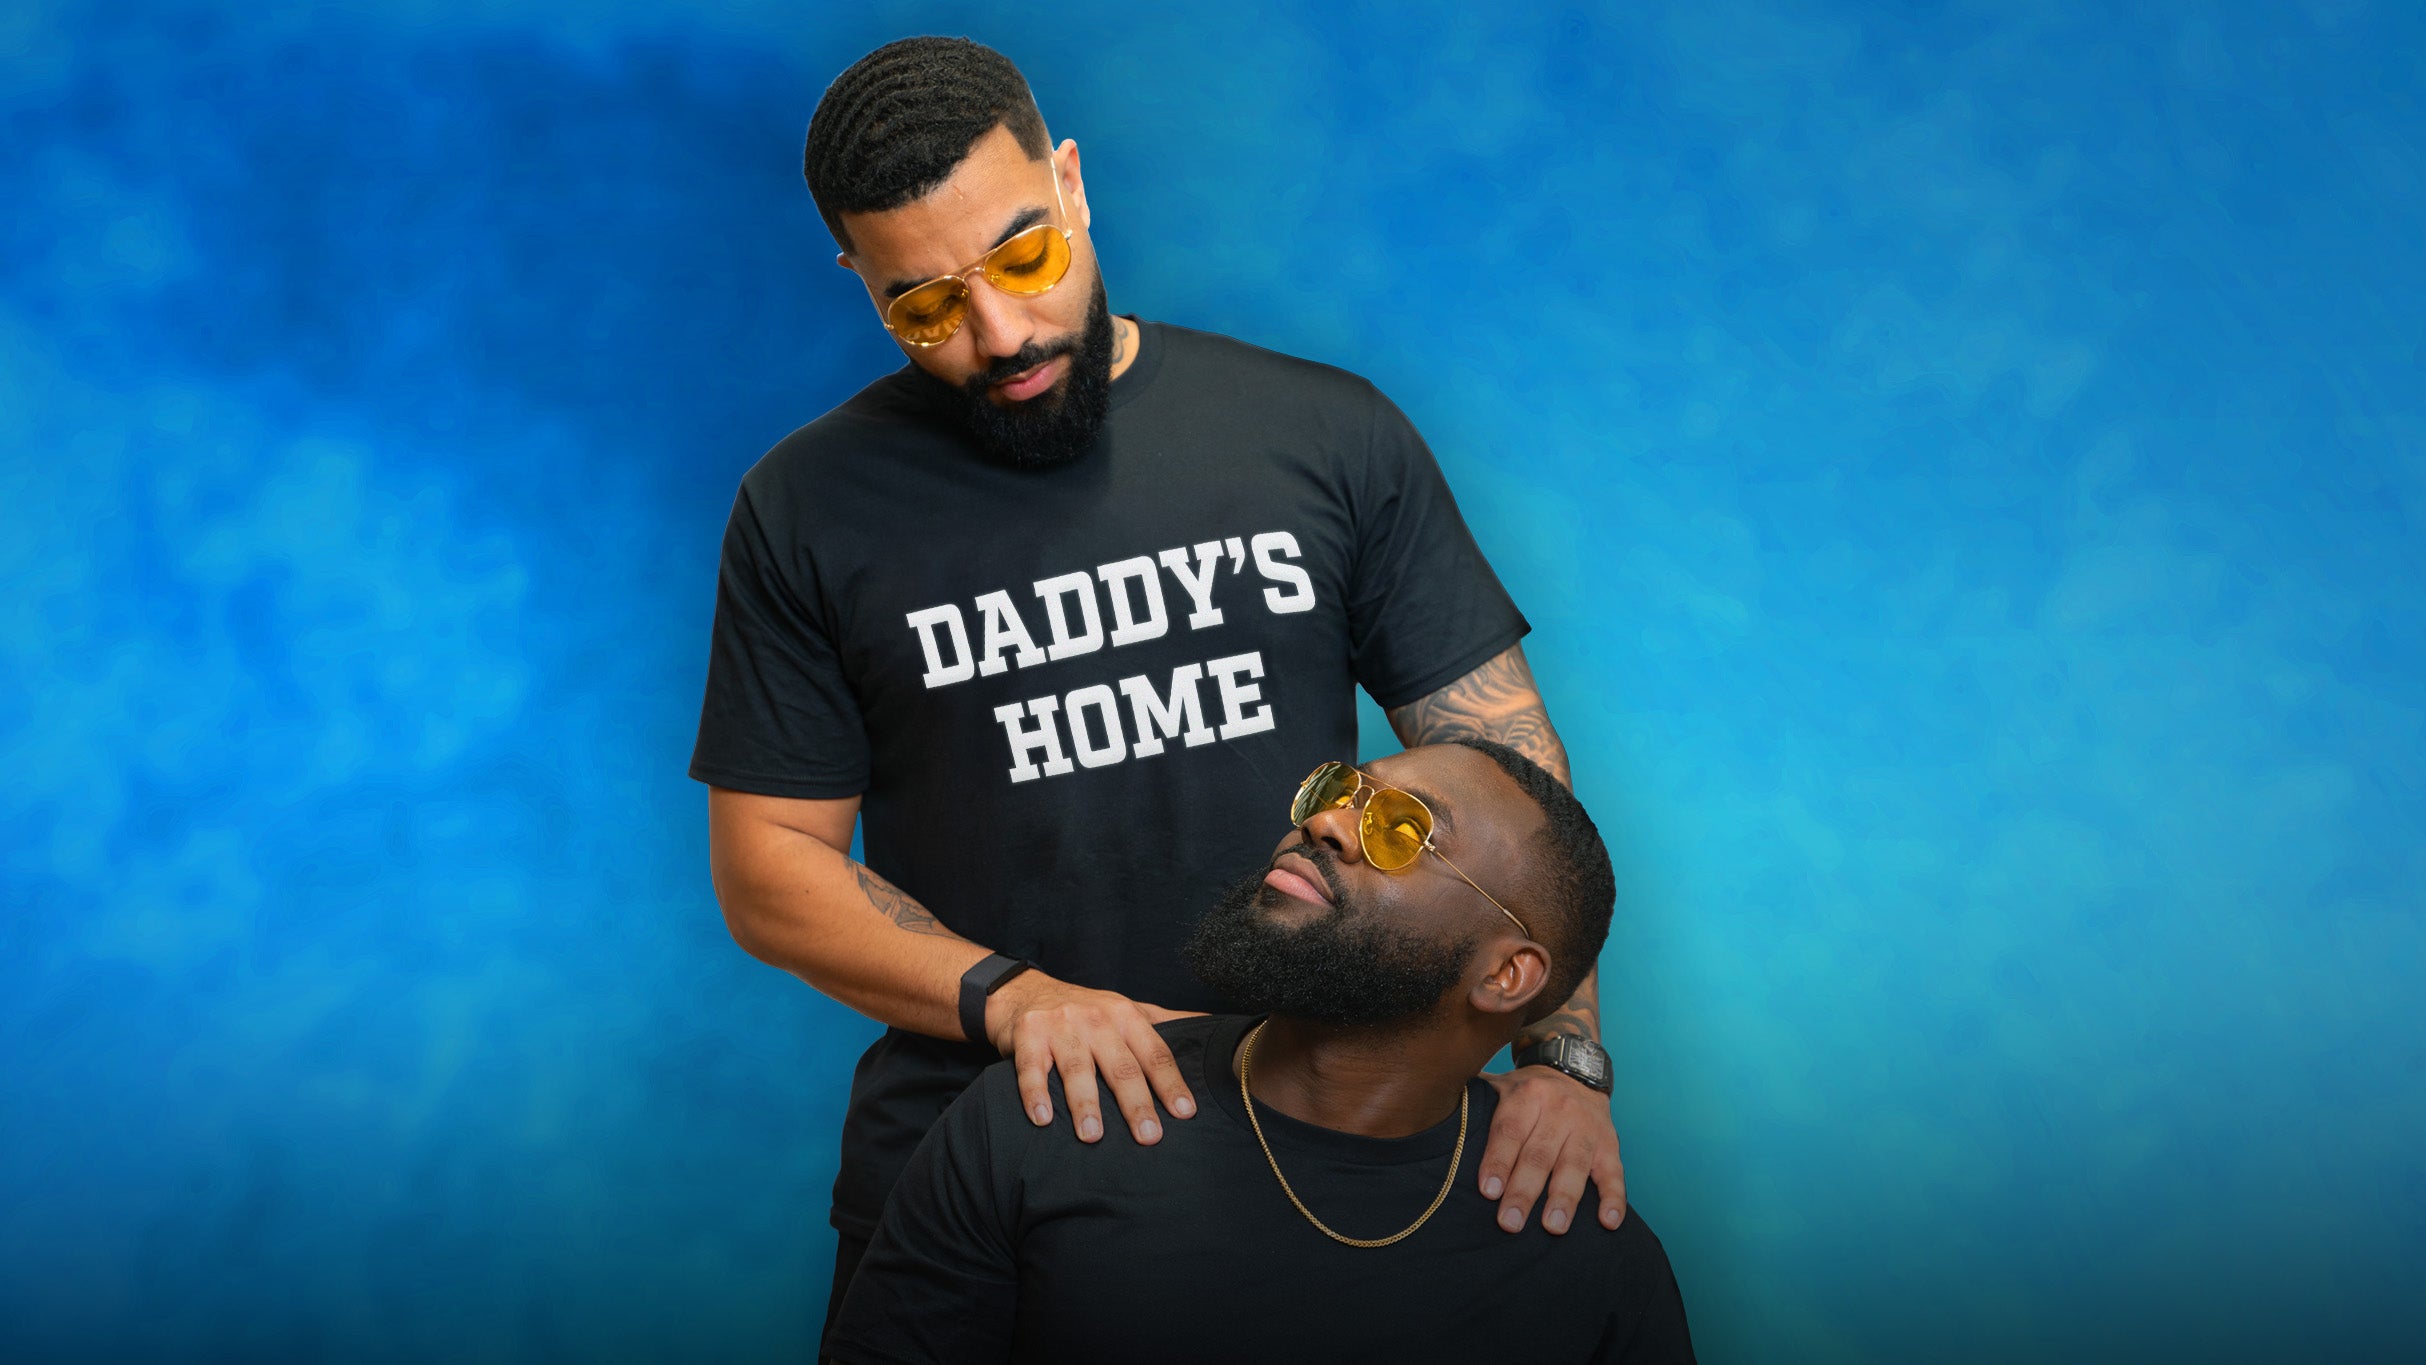 ShxtsNGigs: Daddy's Home Tour presale code